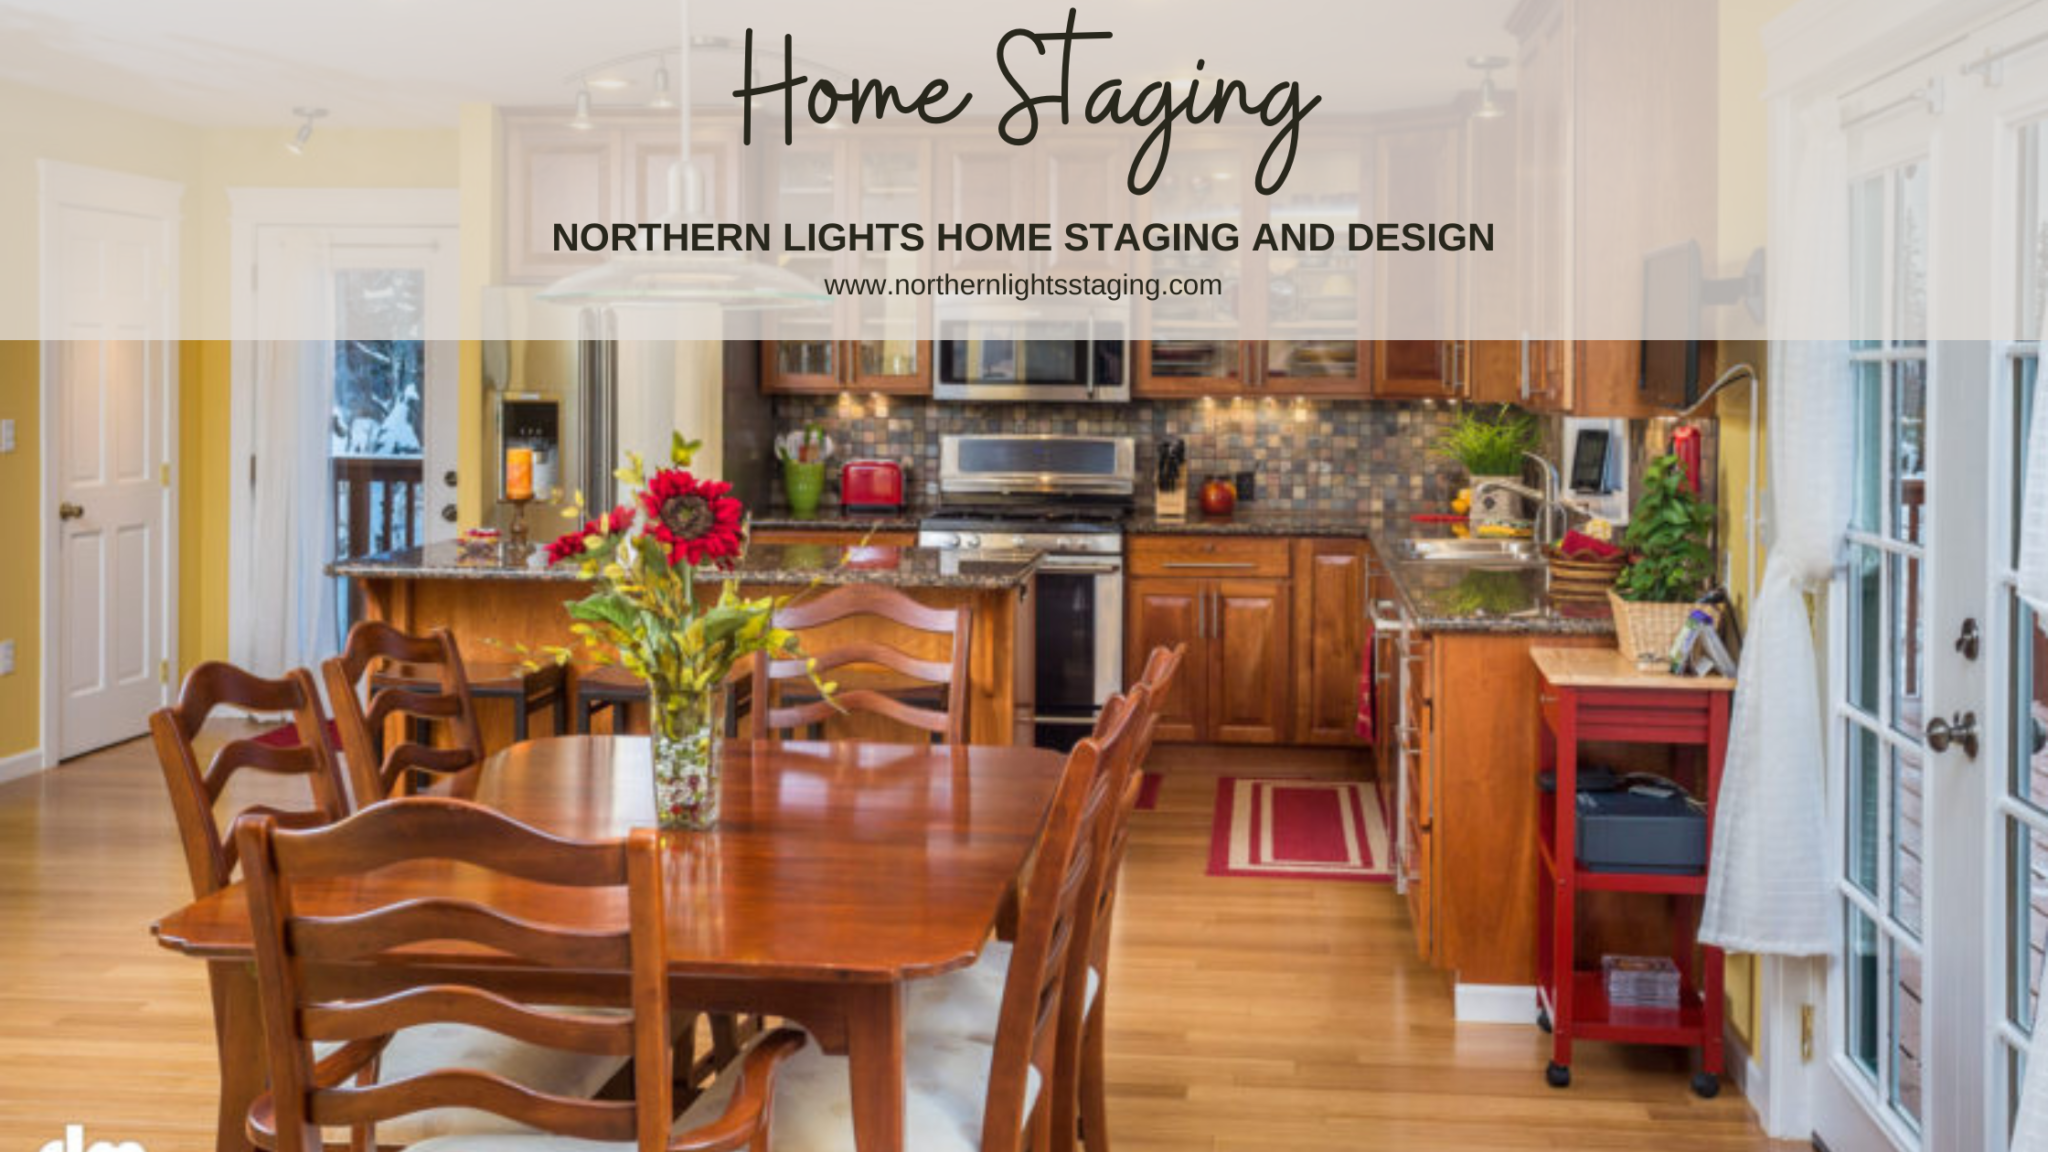 Home Staging Services of Northern Lights Home Staging and Design